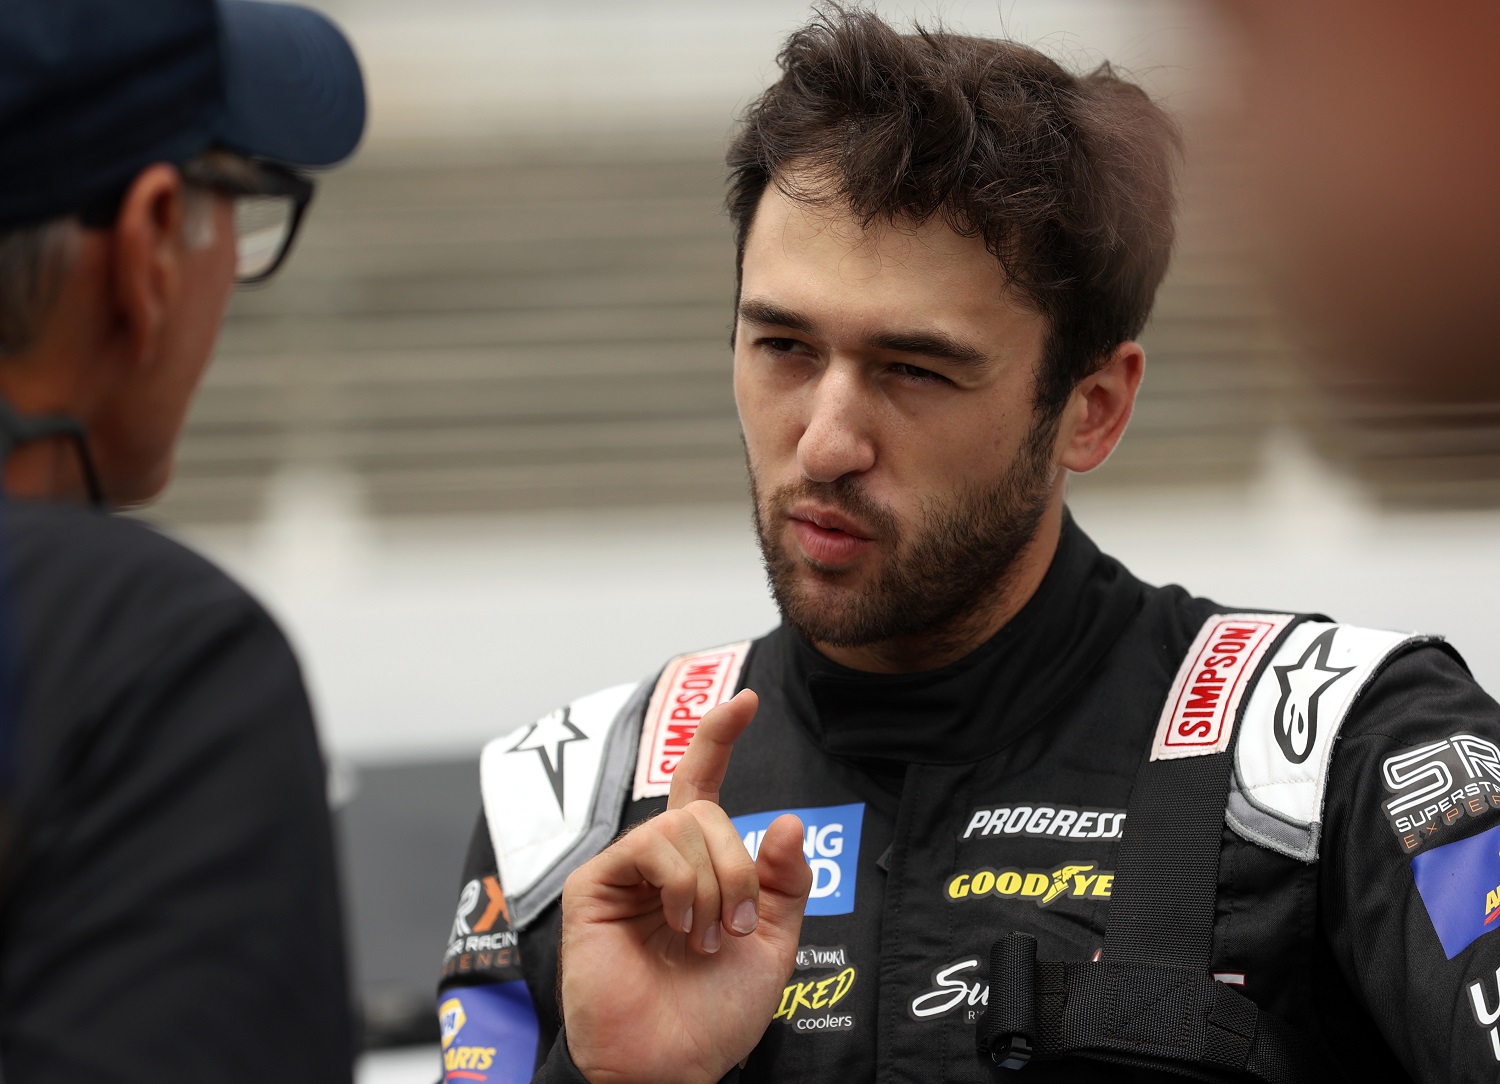 Chase Elliott talks with Ray Evernham on the grid during practice prior to the Camping World Superstar Racing Experience event at Nashville Fairgrounds Speedway on July 17, 2021.